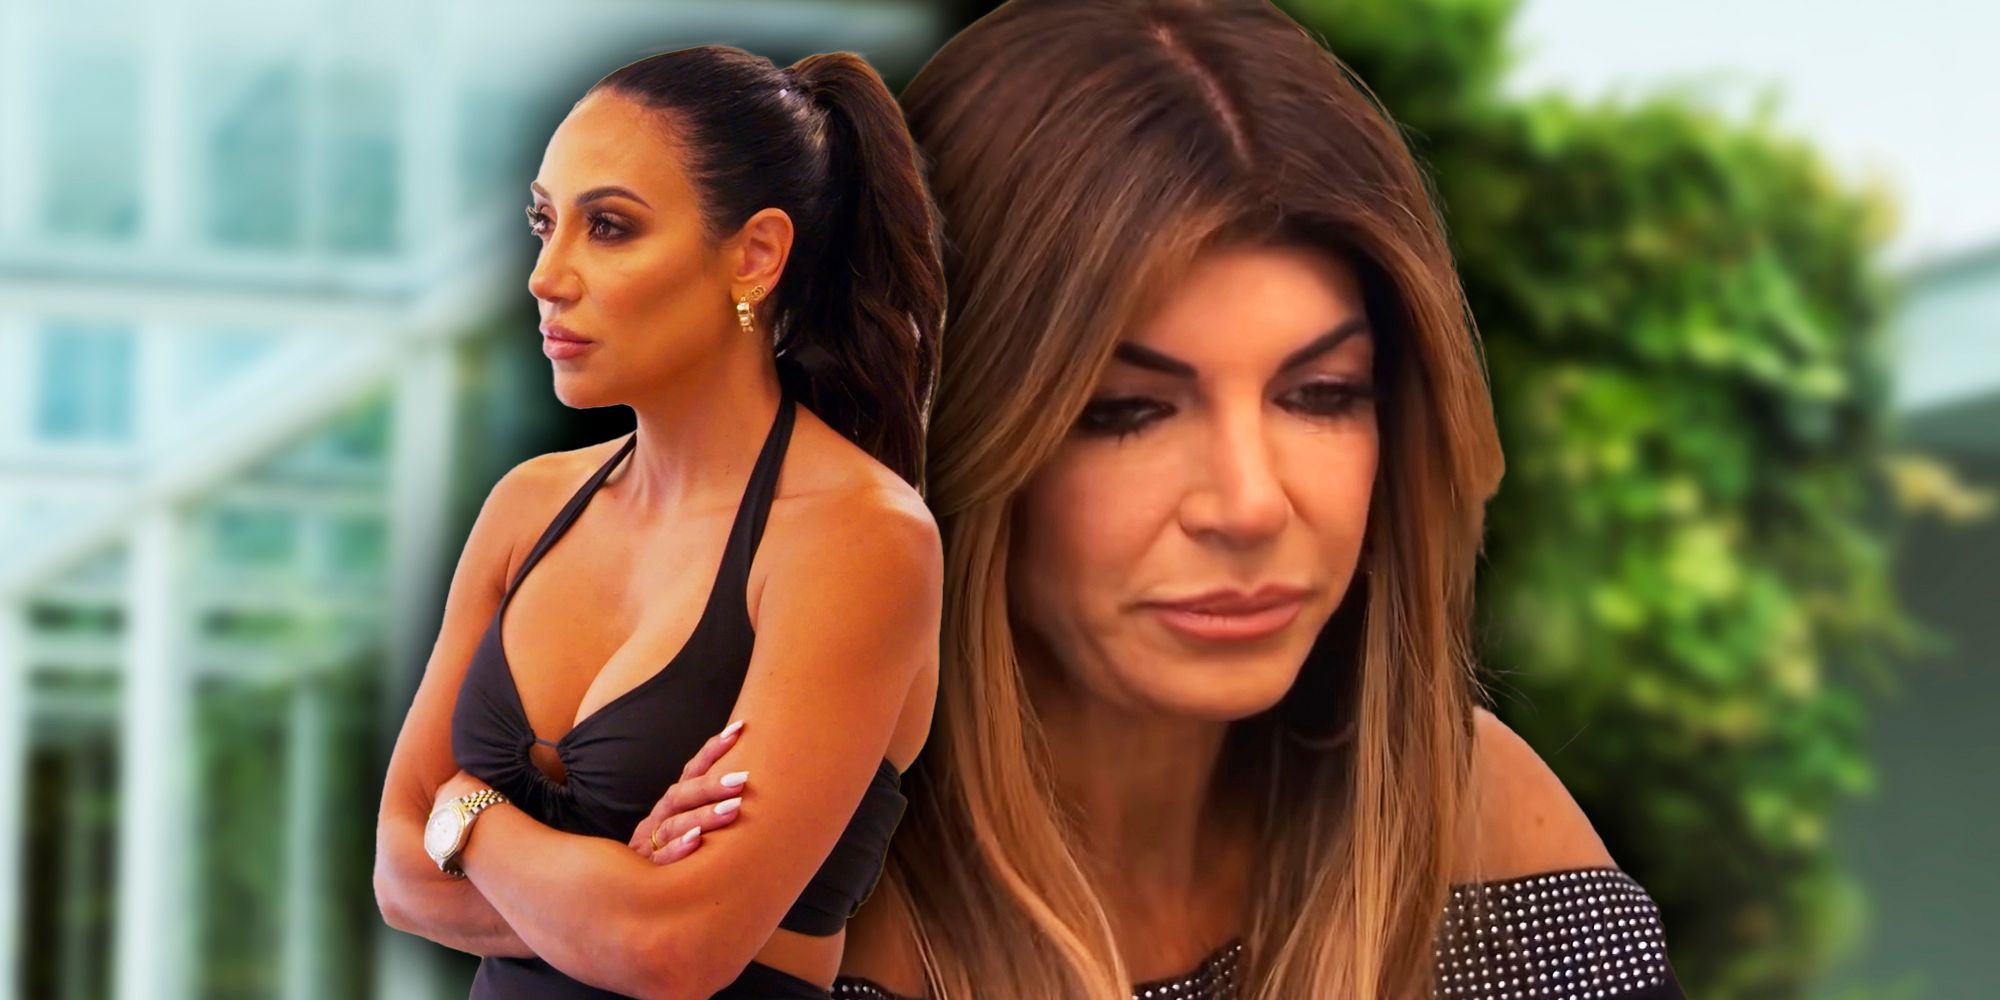 teresa guidice montage with melissa gorga both with serious expressions the real housewives of new jersey RHONJ